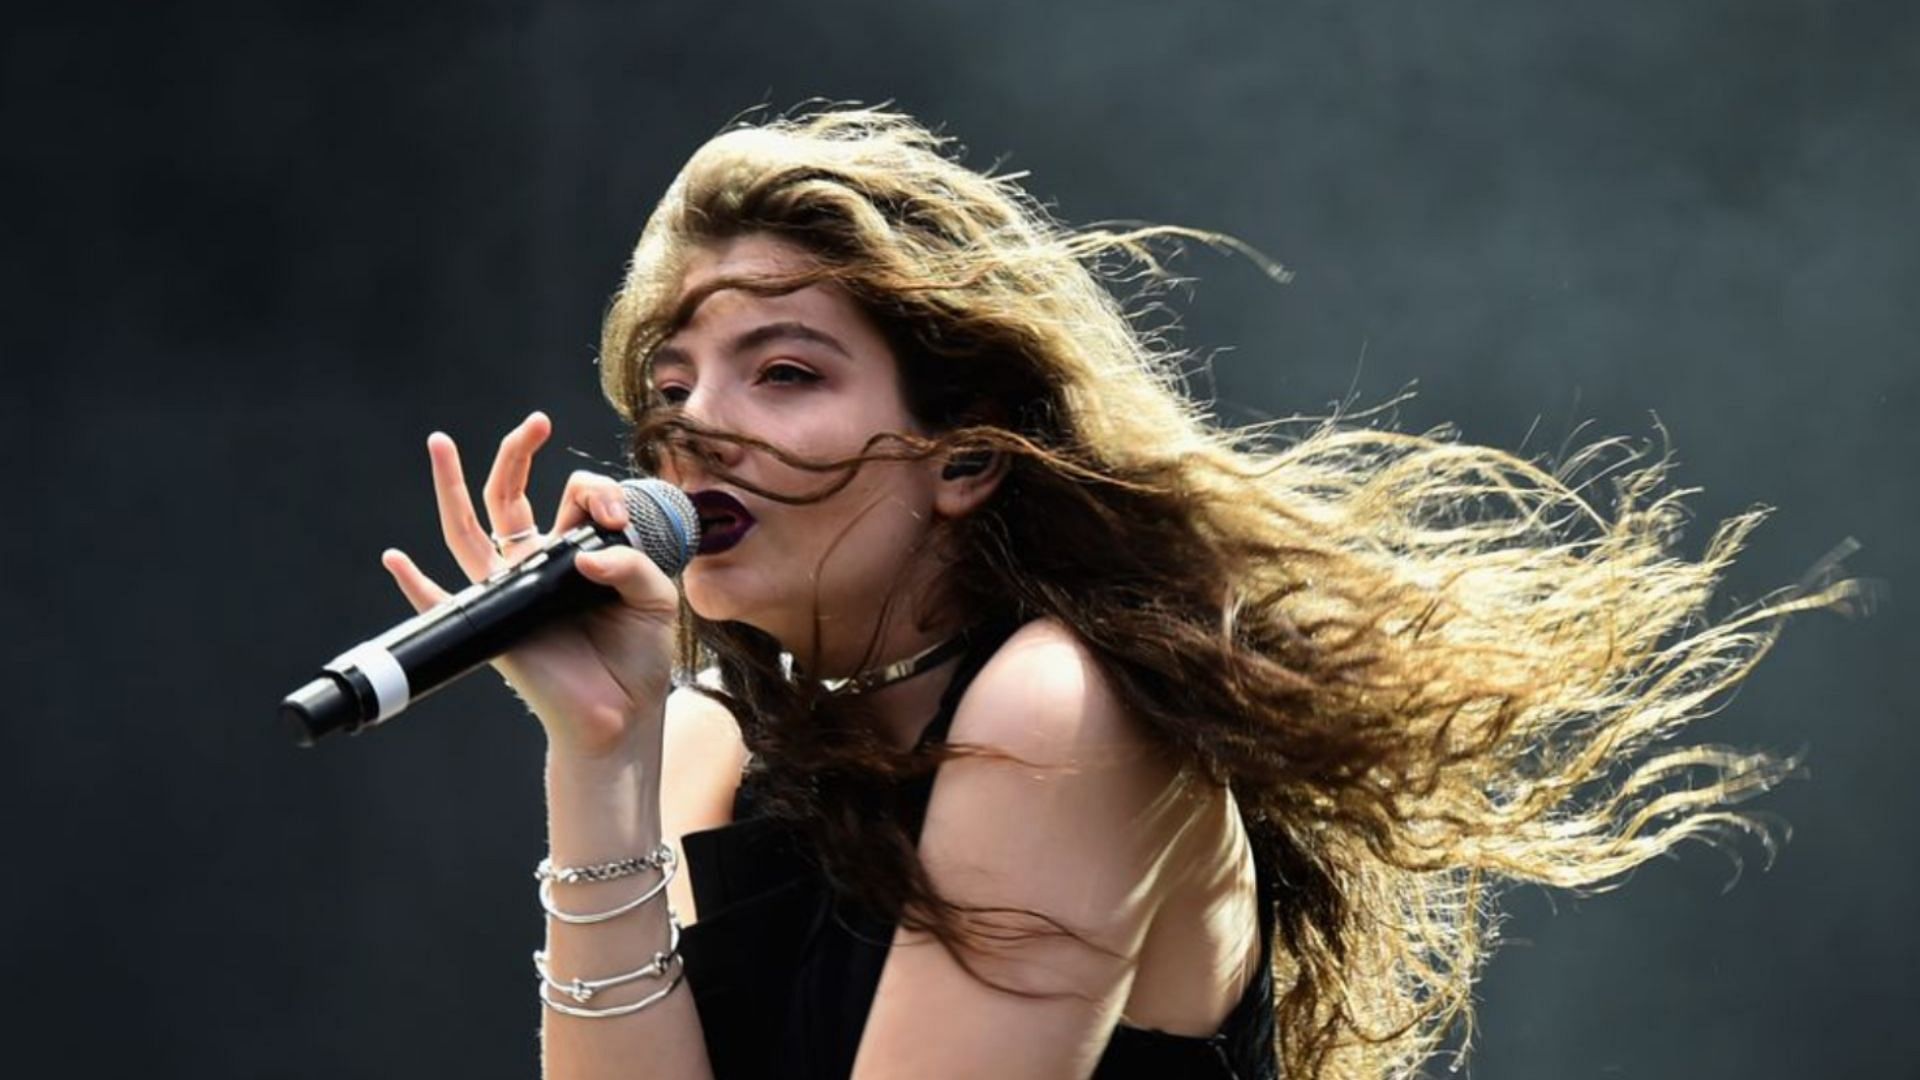 Lorde said she stays away from social media as she feels protective of her sense of image and self, which is constantly developing (Image via Getty)